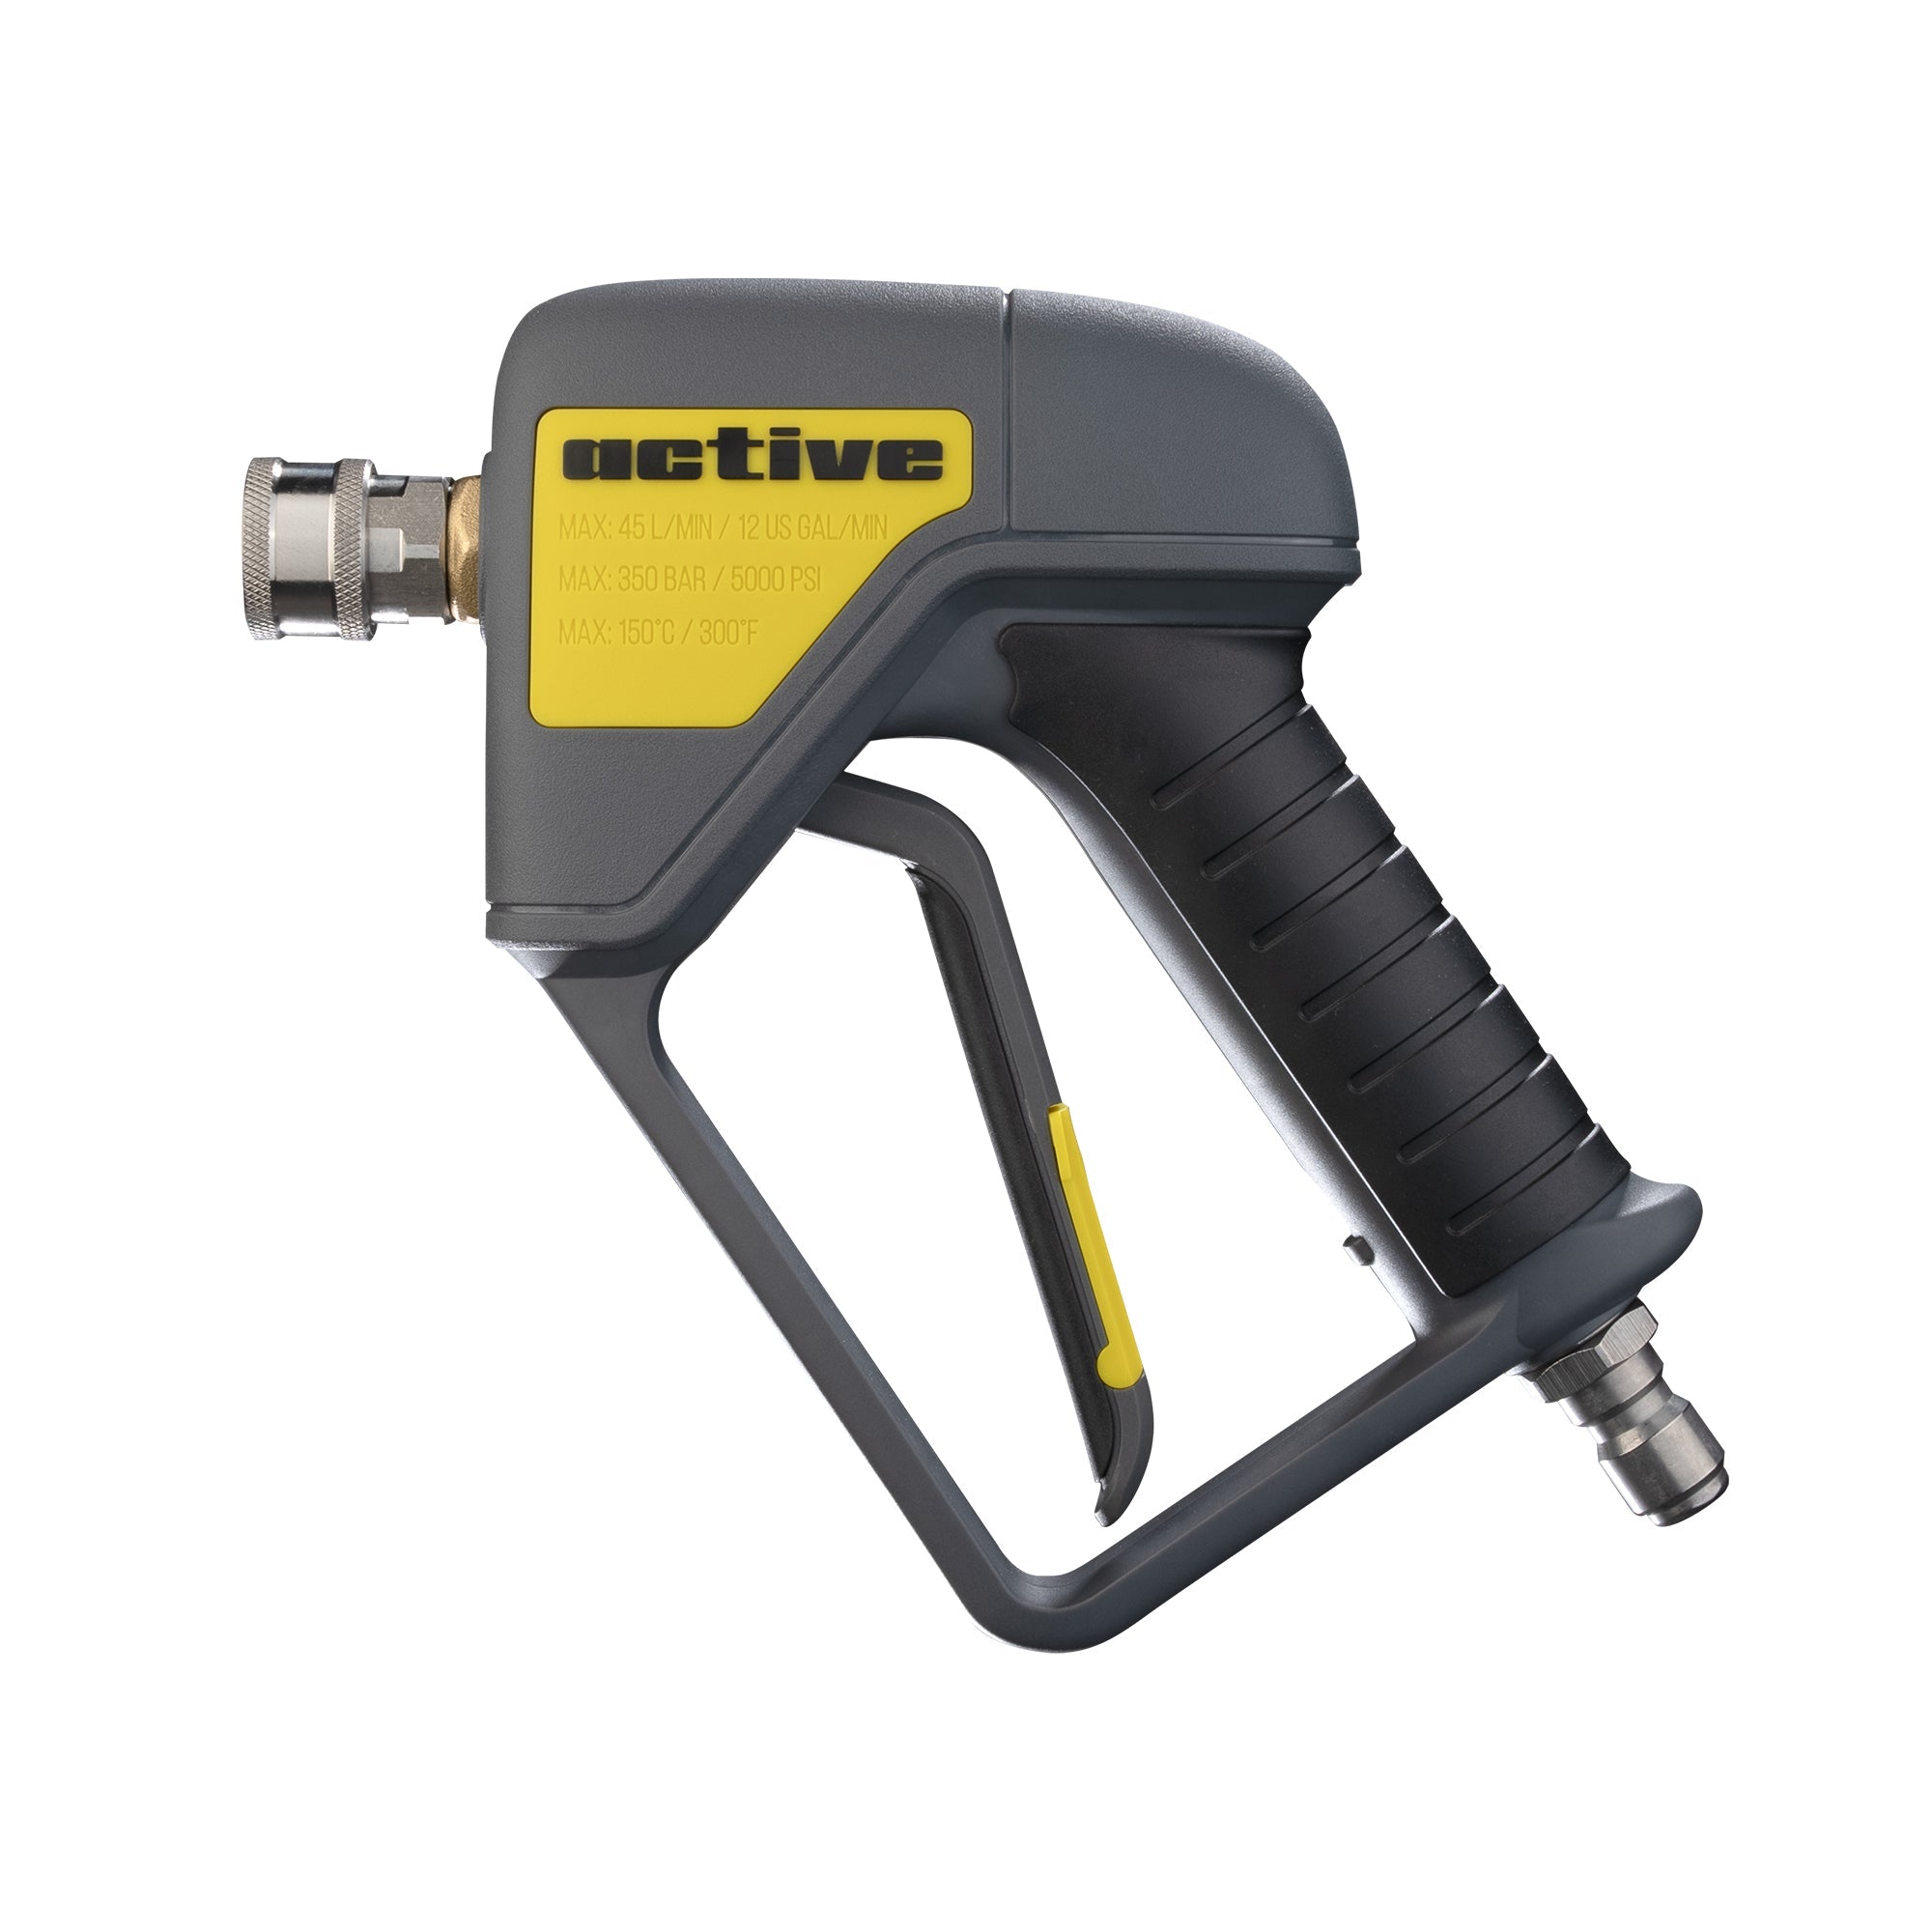 A professional high-pressure spray gun with a metallic nozzle and a black and gray handle marked with the brand name "Active Products Inc." Specifications are noted on the gun's body. This model is compatible as an Active Swivel Gun, enhancing maneuverability during use.